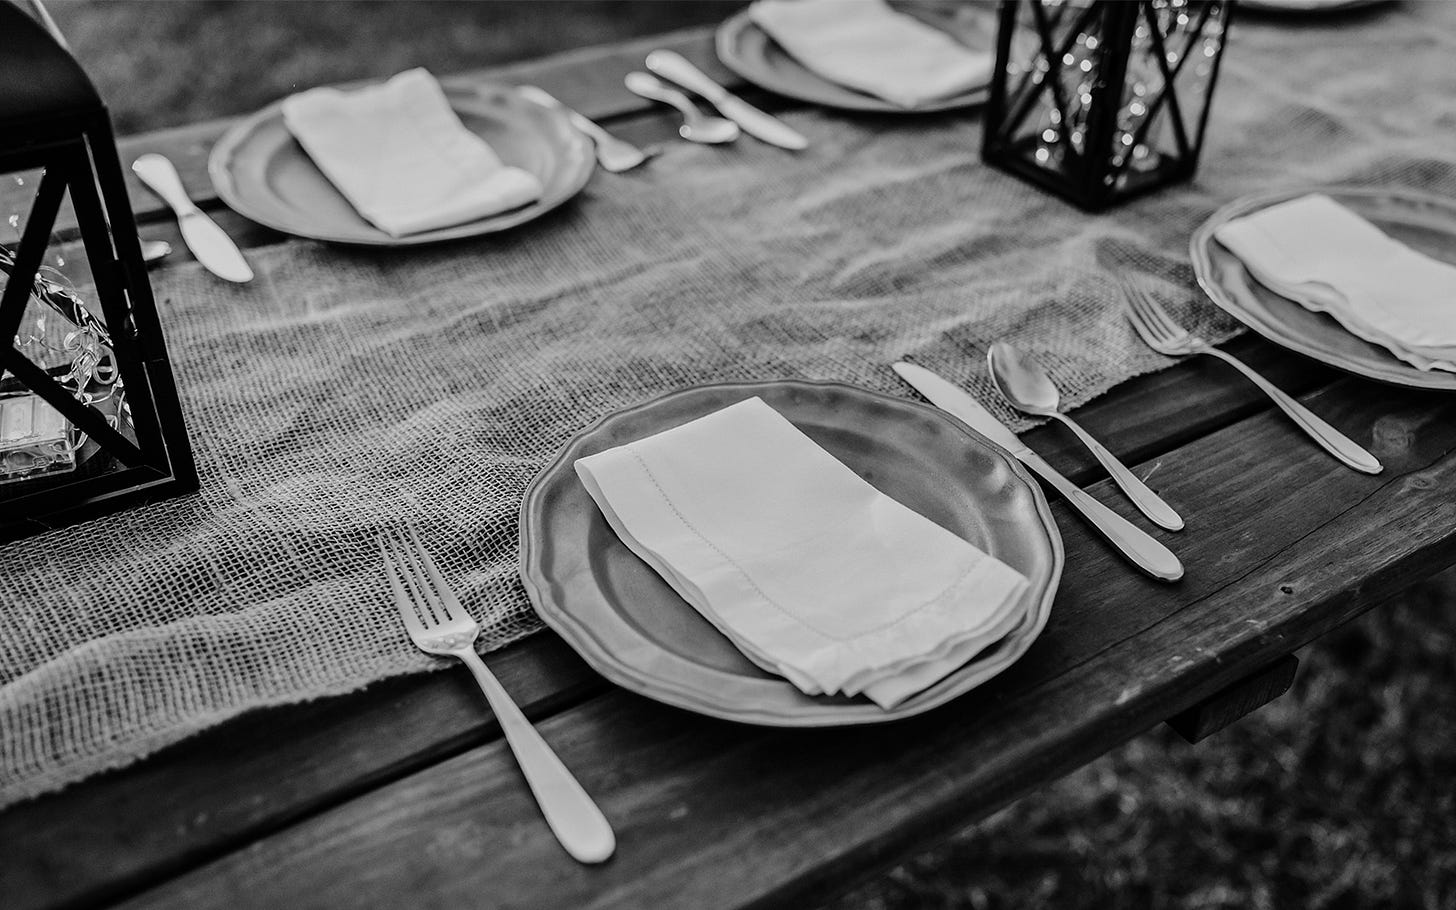 Wood table set with plates, silverware and napkins. A corse fabric runs down the middle of the table.